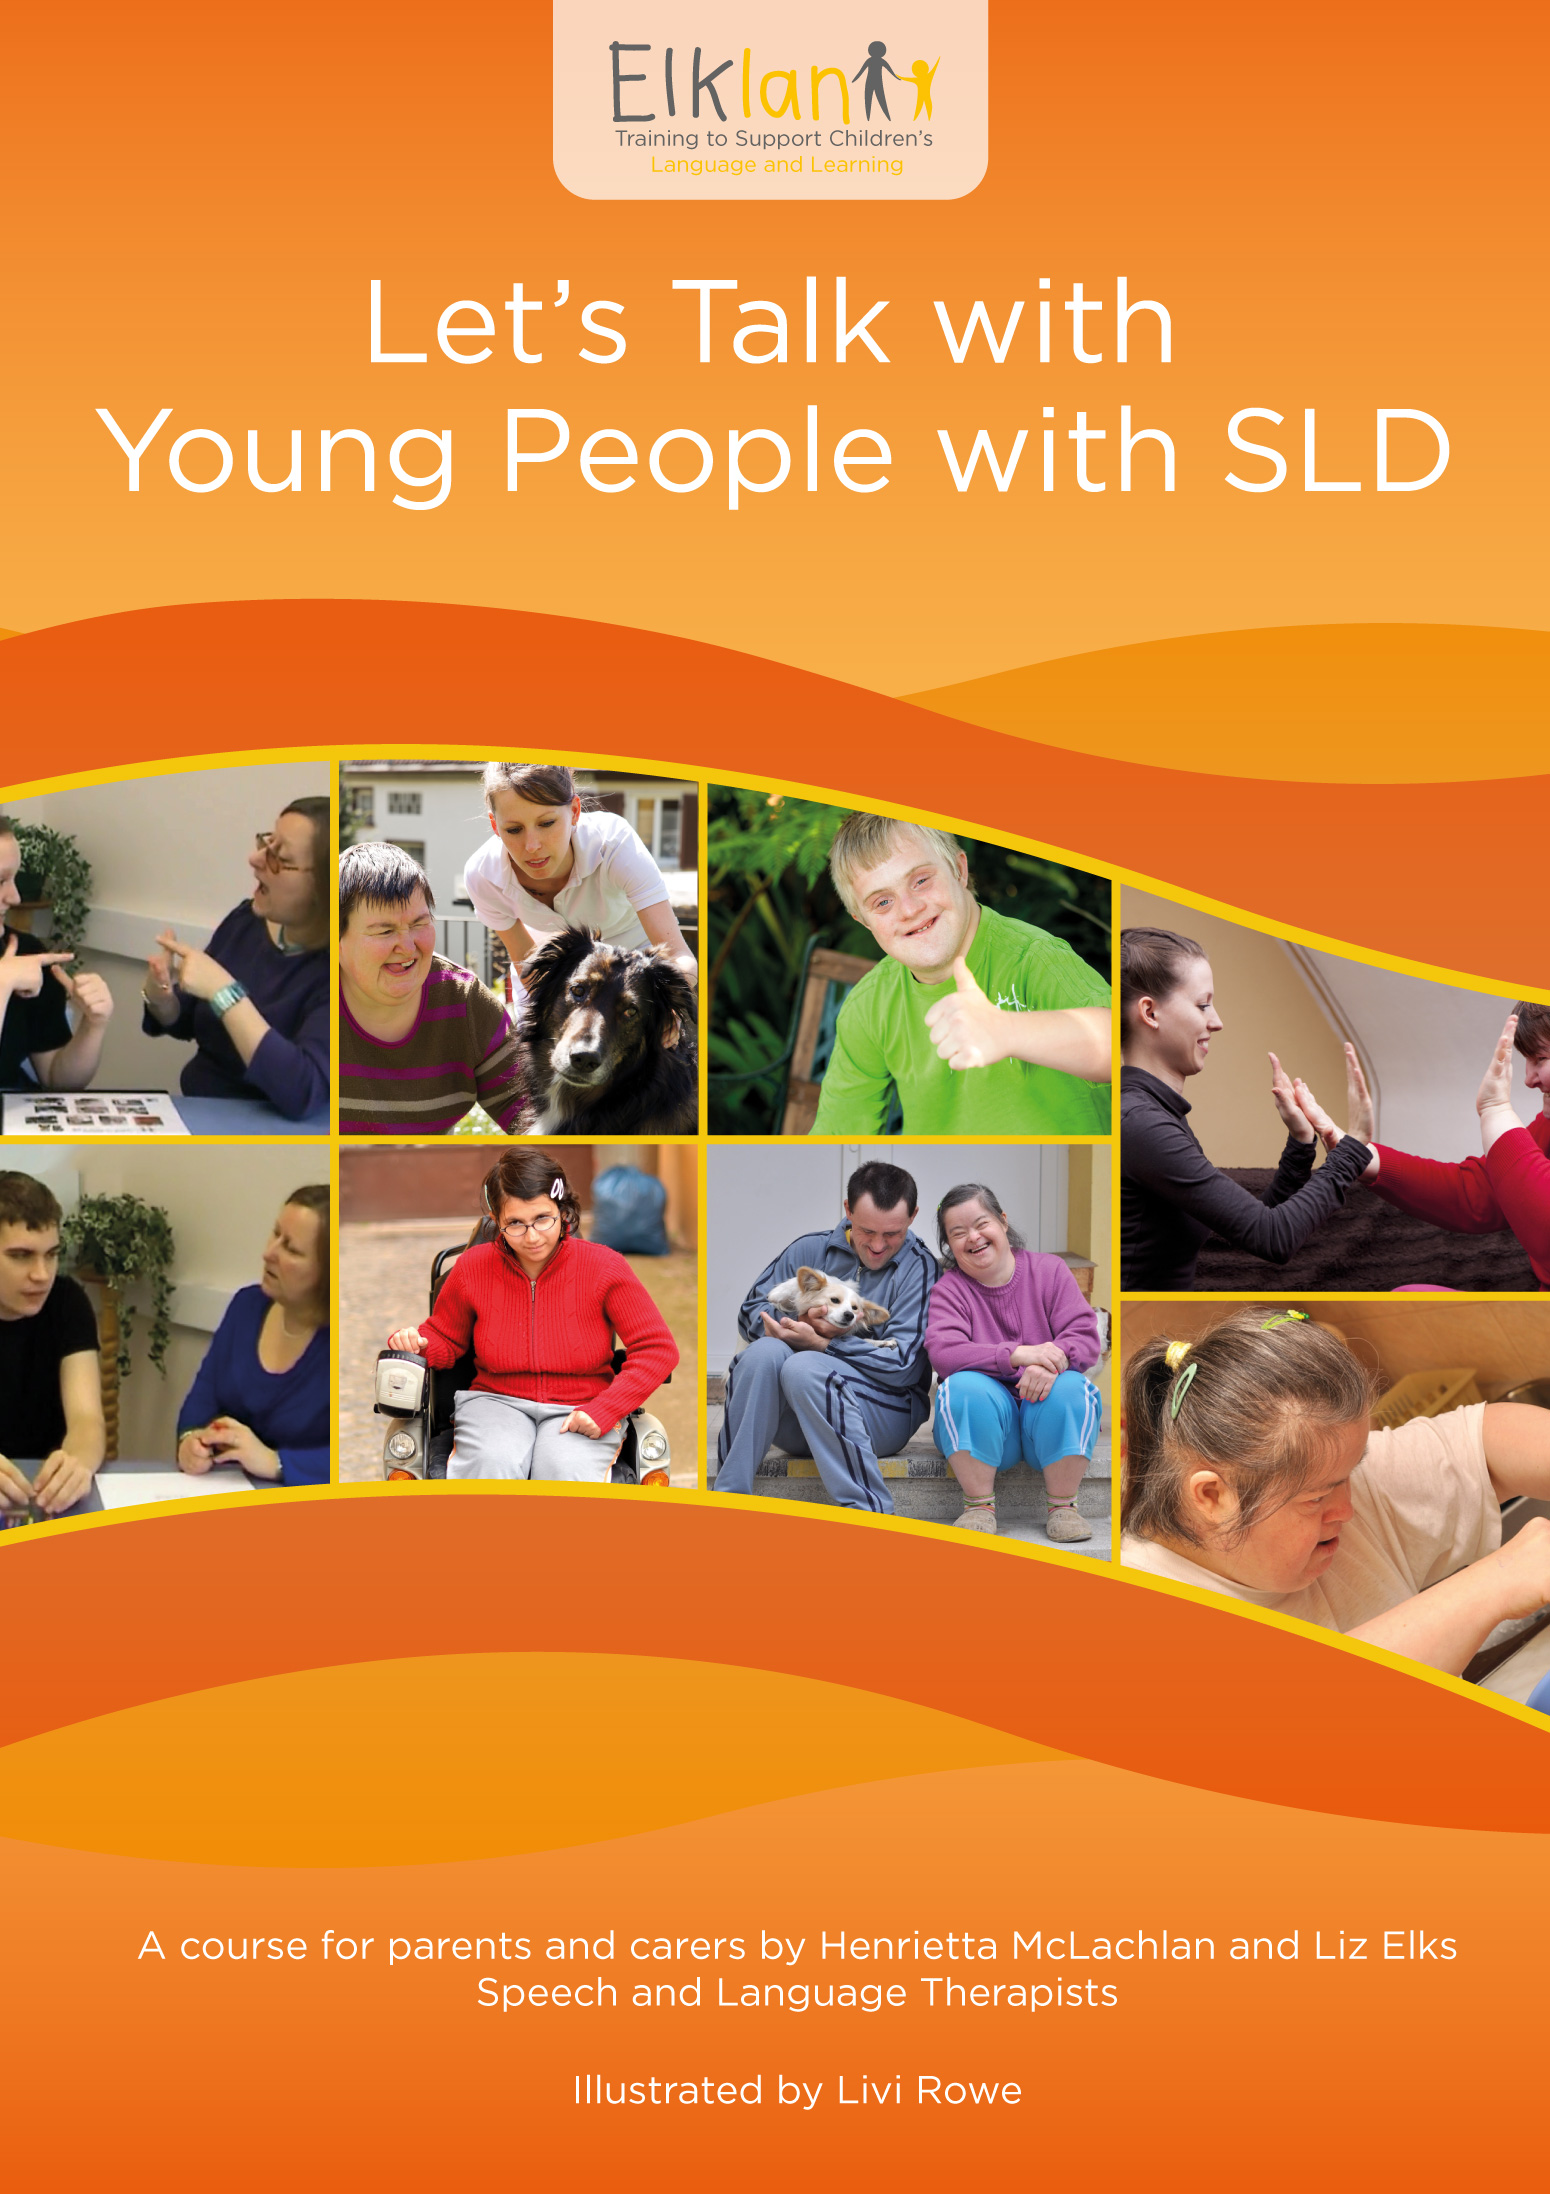 Teaching Manual for Let's Talk with Young People with SLD